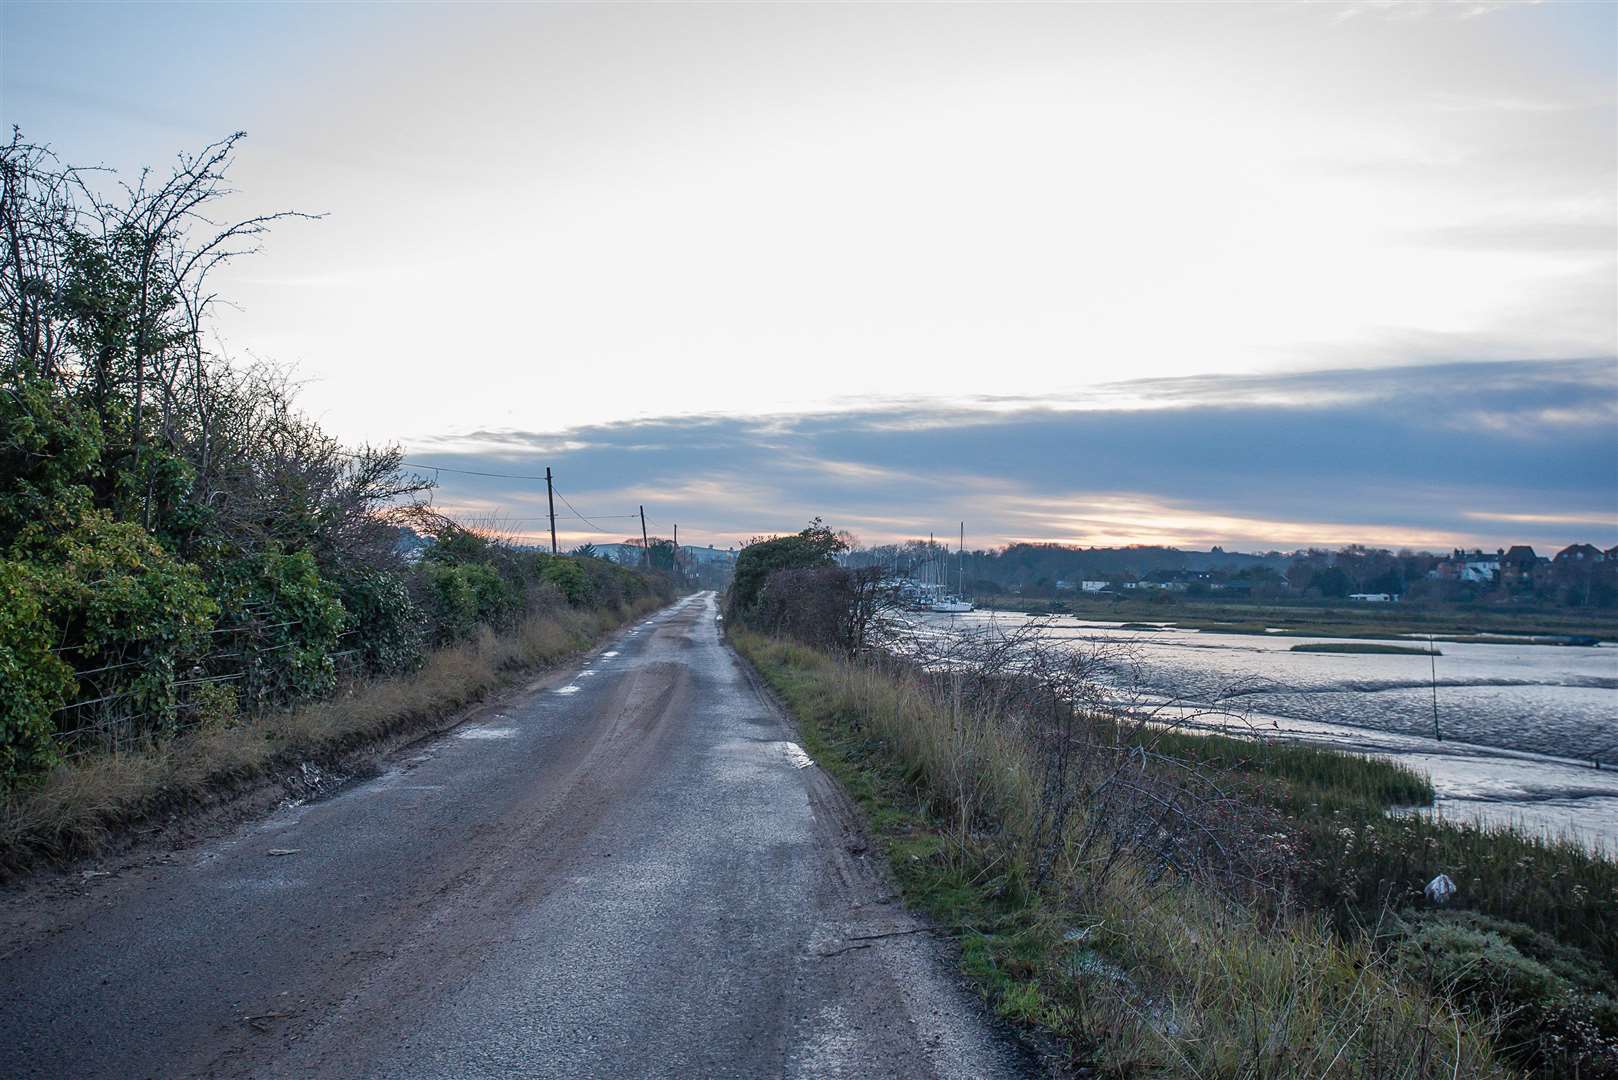 Road leading up to the East Kent Recycling plant at Oare Creek